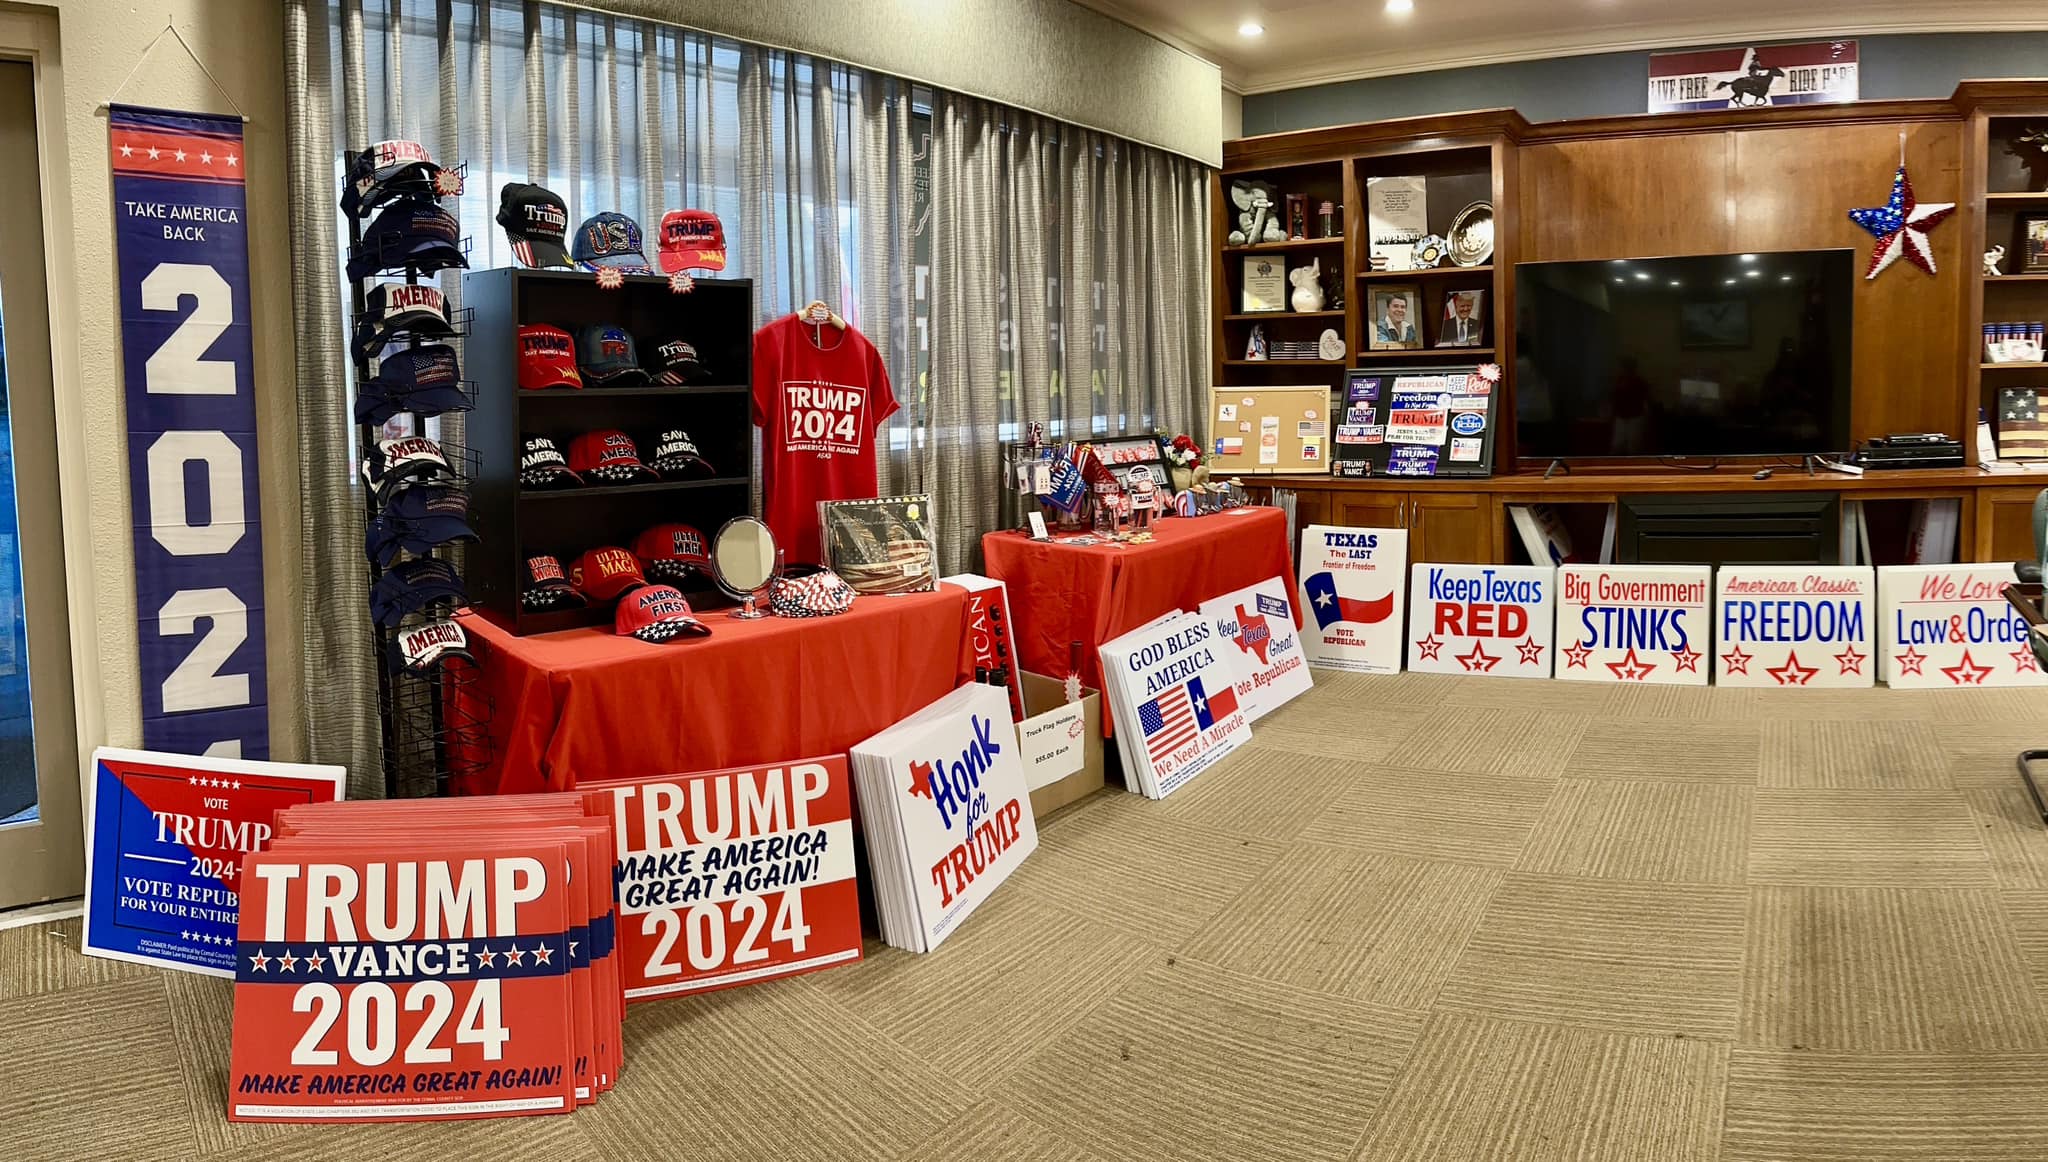 Our Headquarters is bursting with excitement over the upcoming election. Please join us by stopping by and donating, volunteering, getting a sign for your yard or a bumper sticker for your car. We also have hats, t-shirts and other Patriotic gear. Together we can help make America great again! ????????